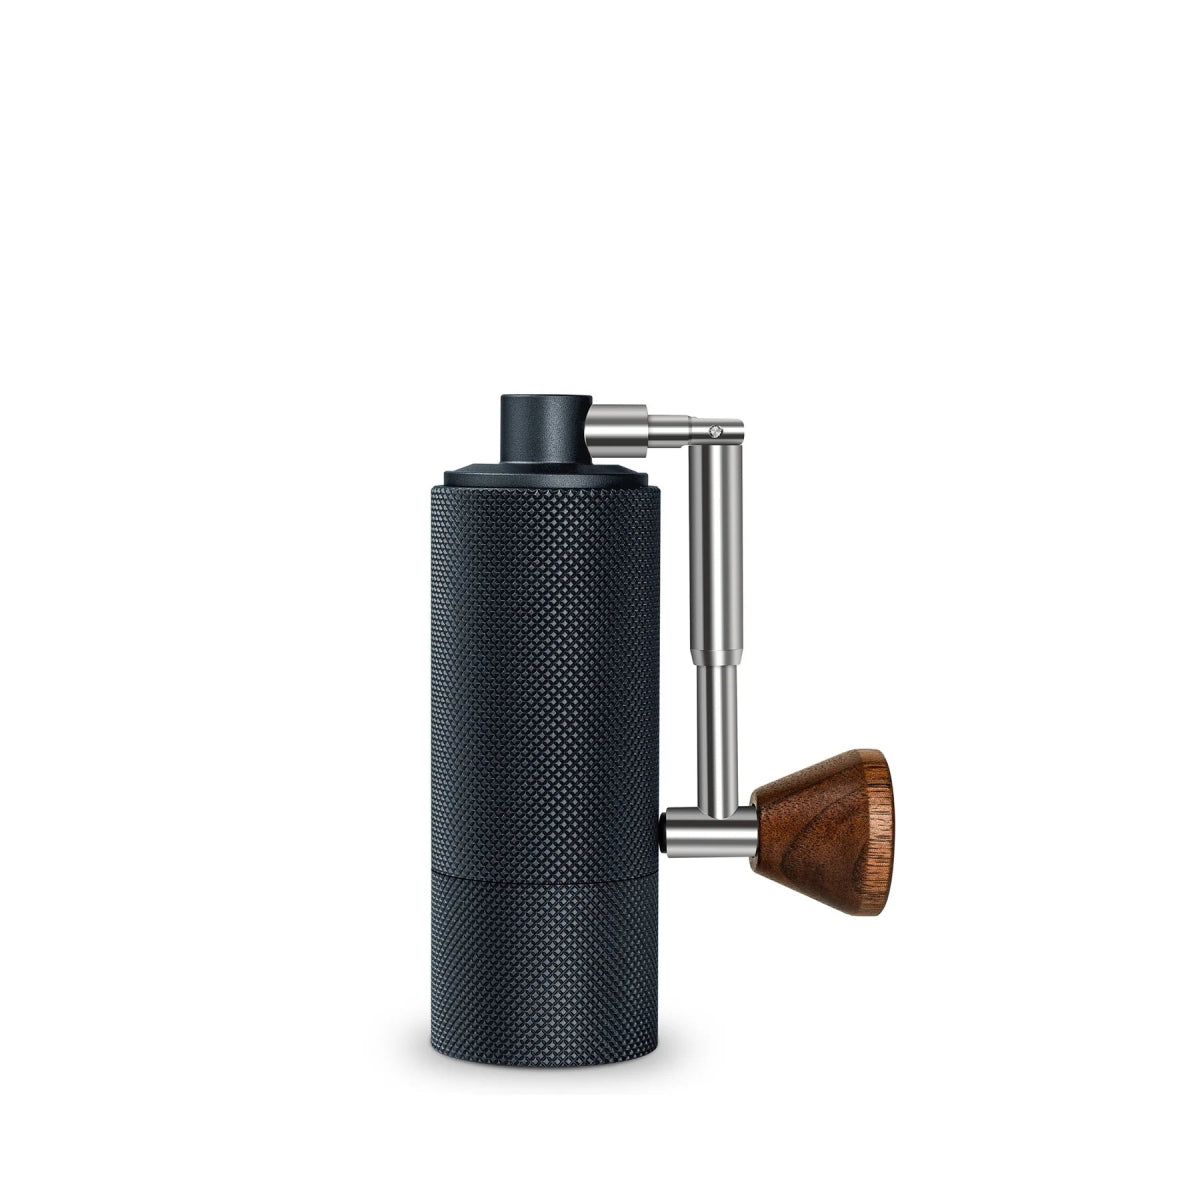 Timemore Nano Hand Coffee Grinder Stainless Steel Burr Manual Coffee Grinder